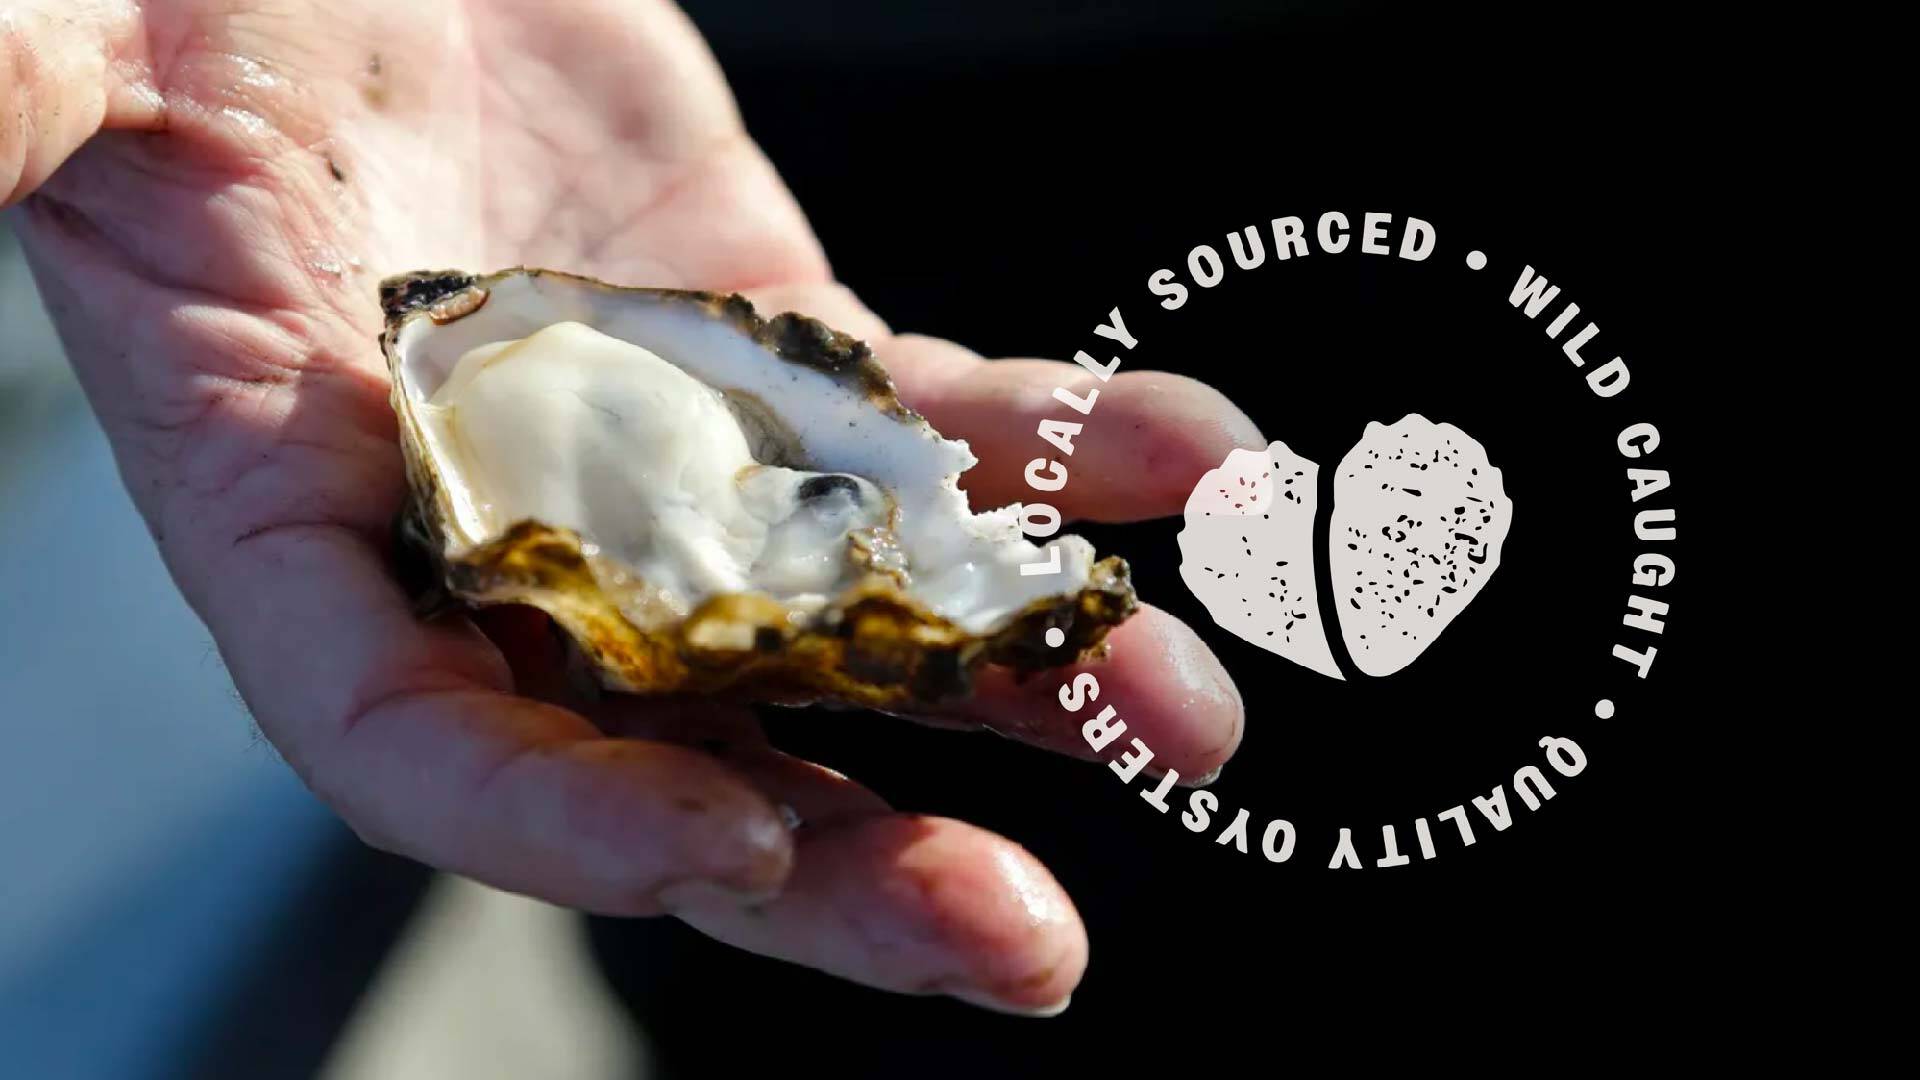 Lifestyle photograph of a person holding an open oyster with a graphic overlaid